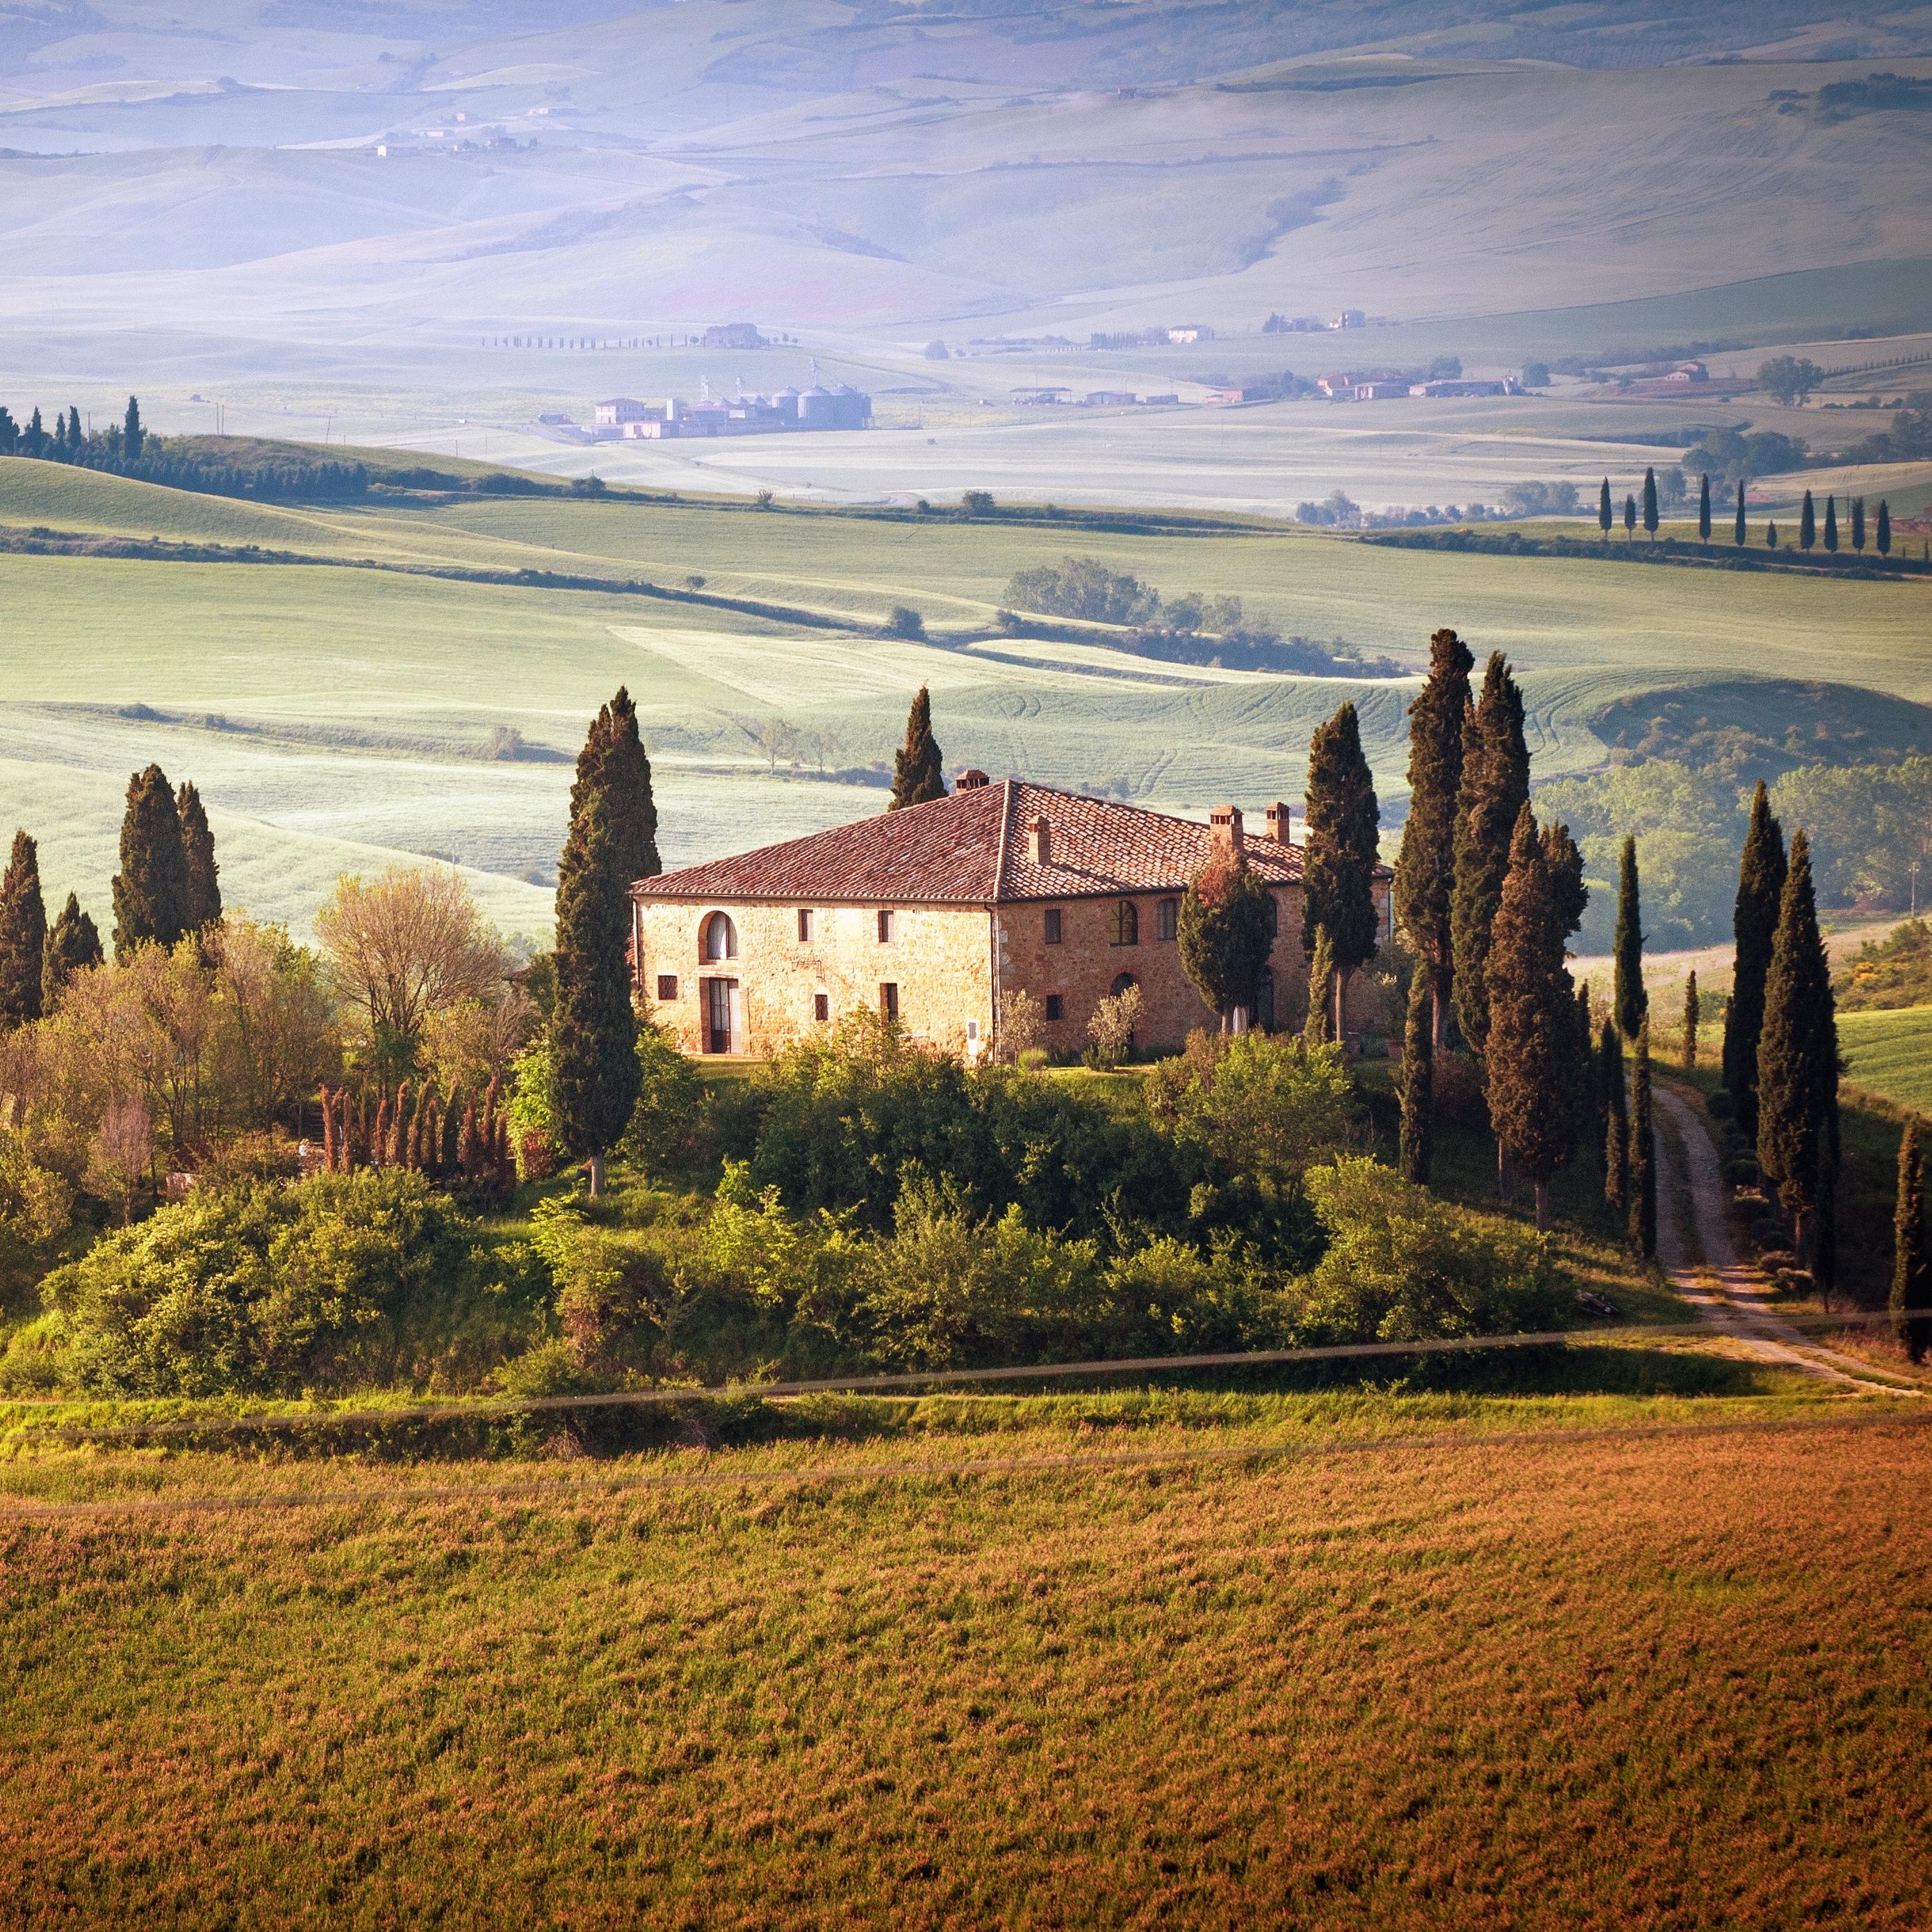 Download wallpaper 2780x2780 italy, tuscany, summer, countryside